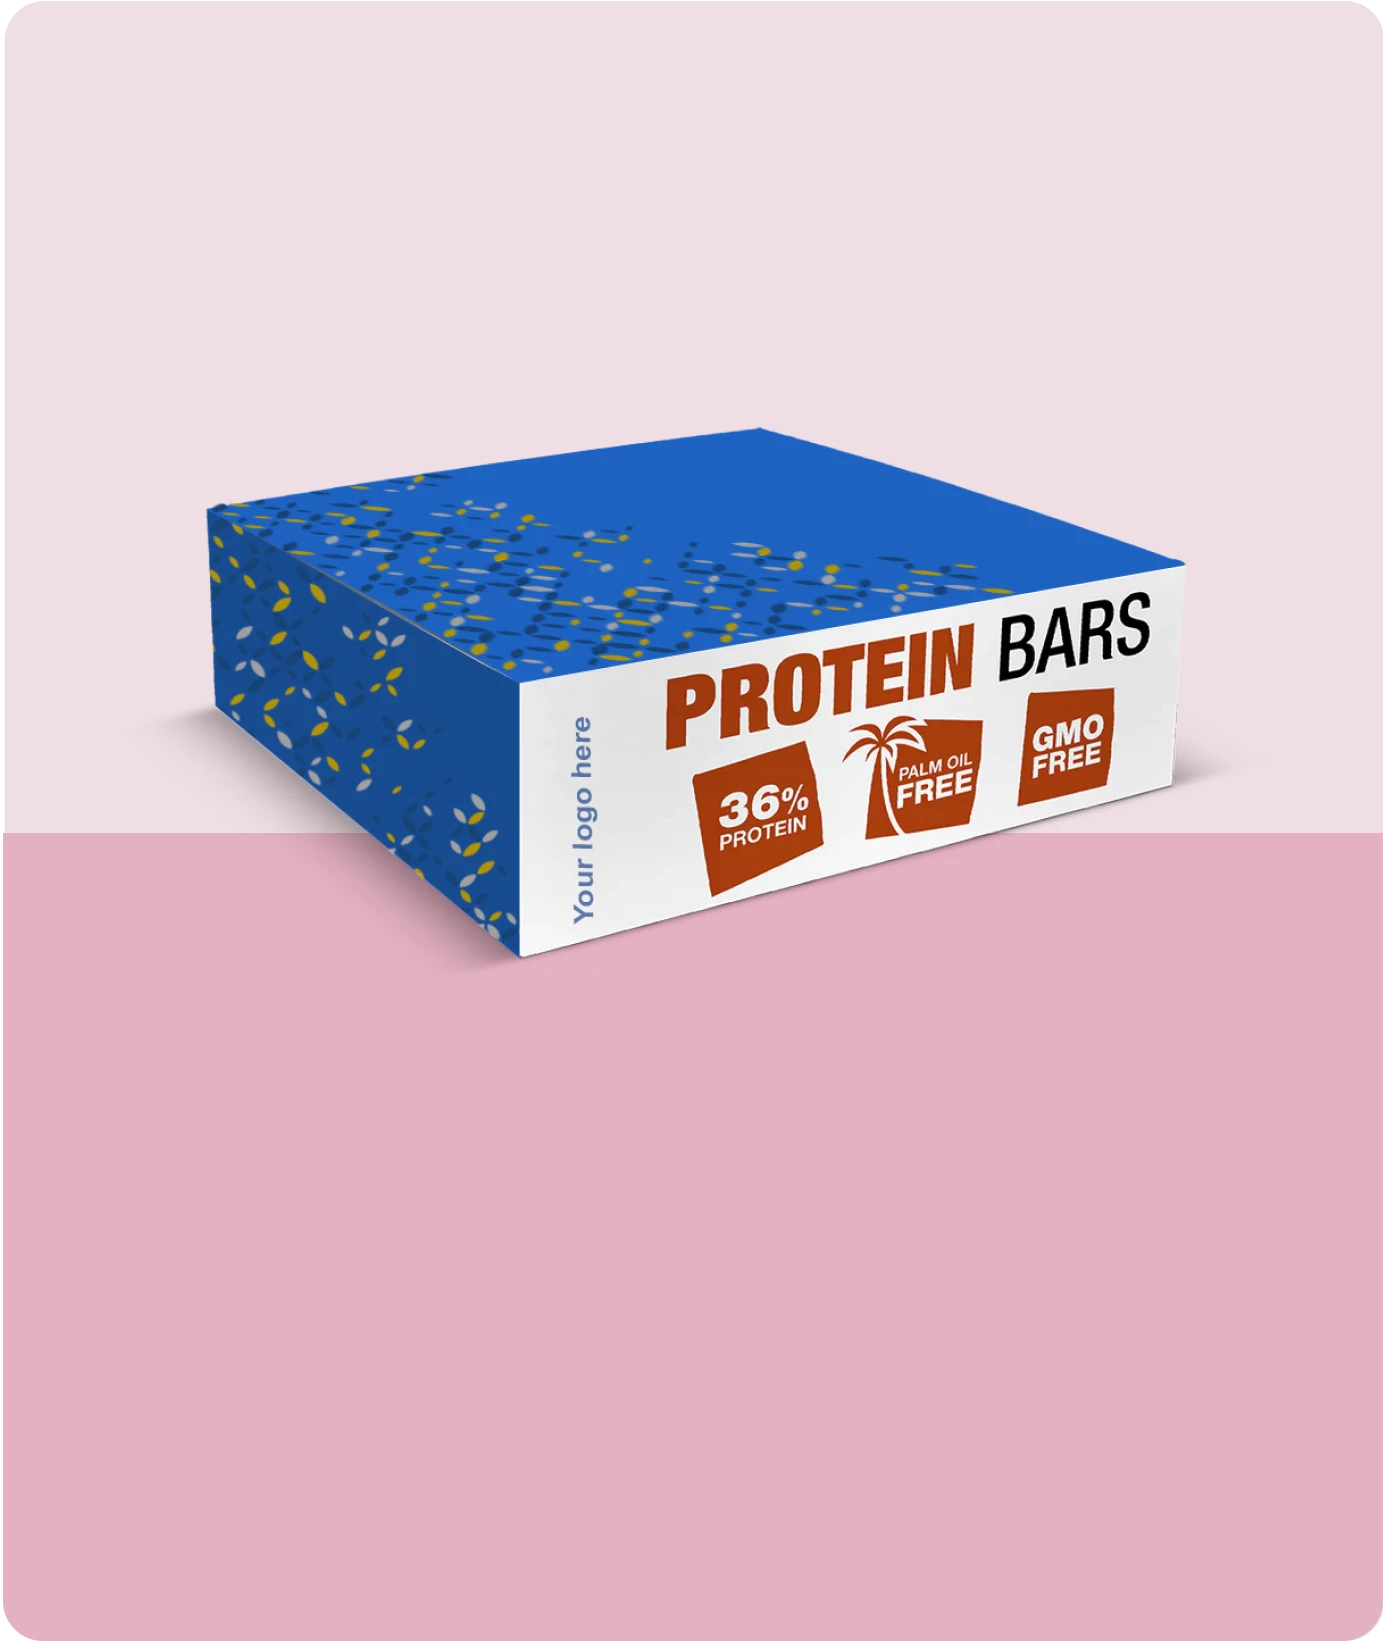 Protein Bar Boxes related product image | The Box Lane